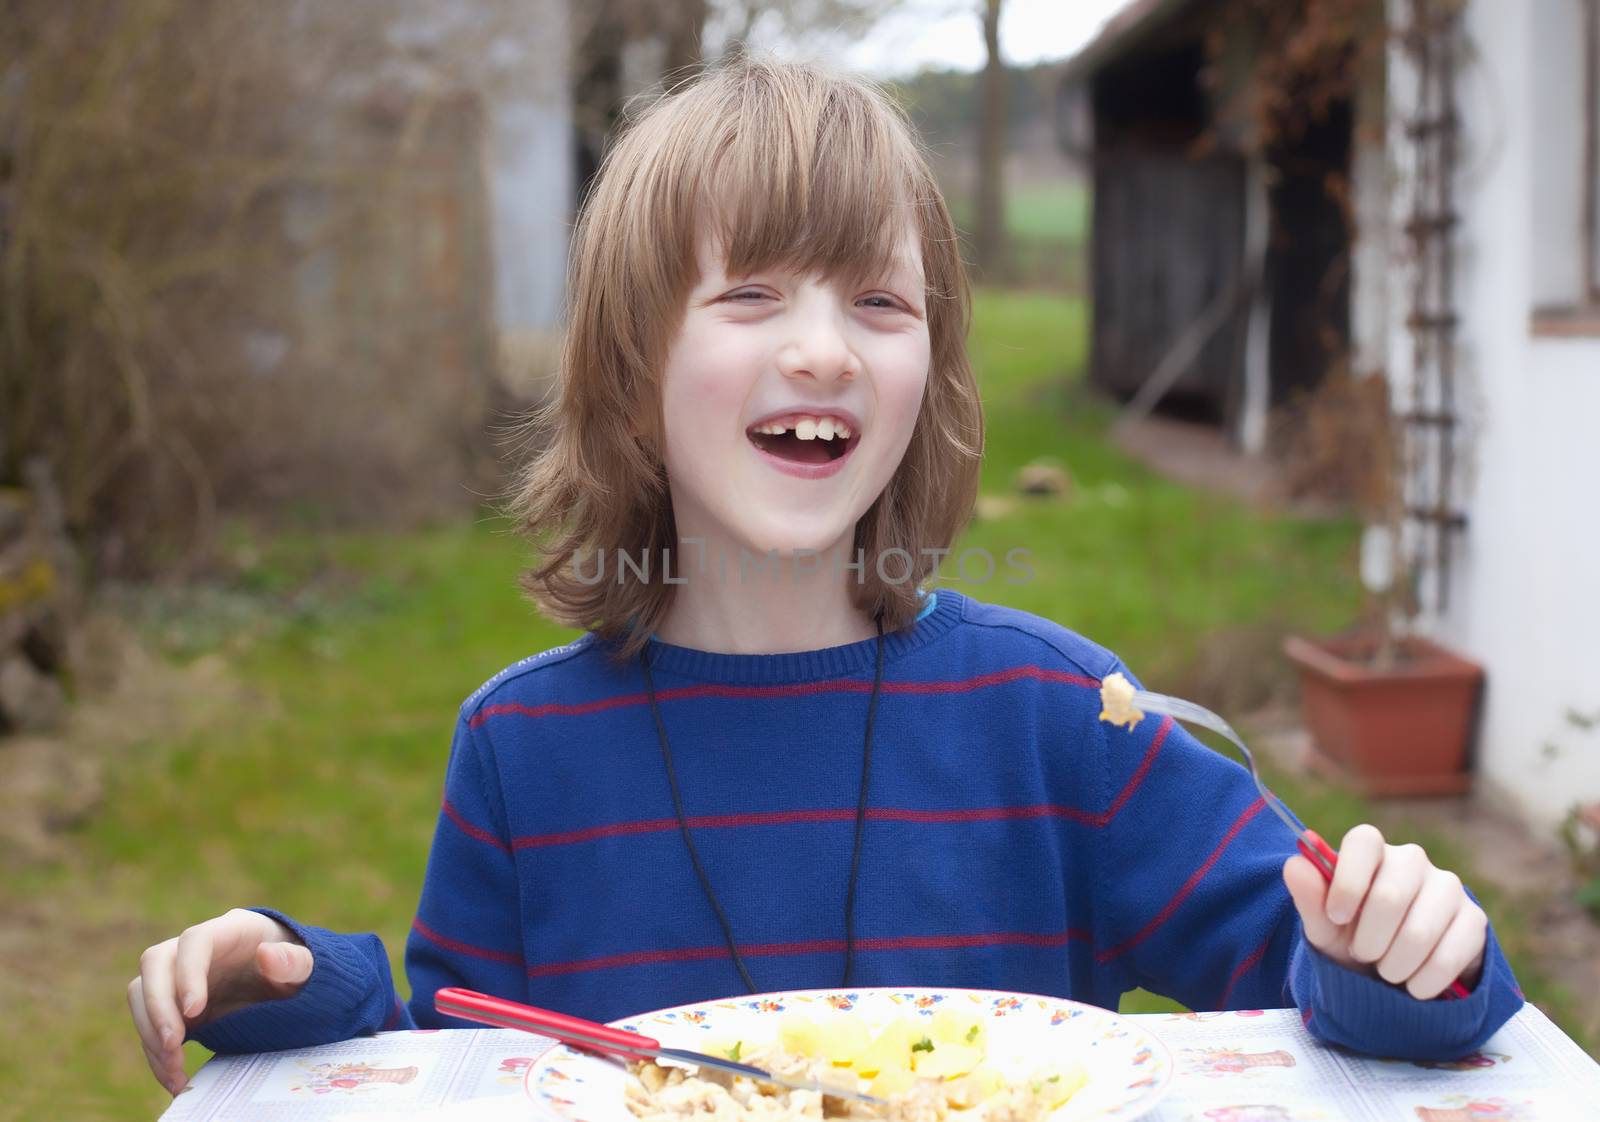 Boy with Blond Hair Eating Outdoors Smiling